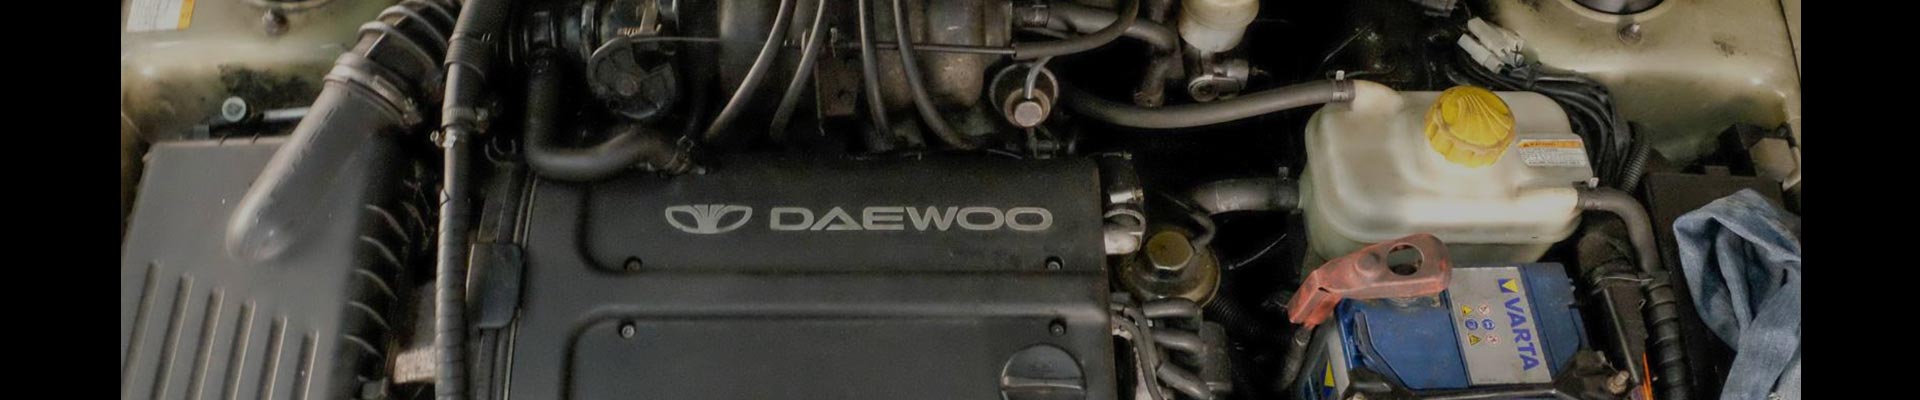 Shop Replacement 2000 Daewoo Nubira Parts with Discounted Price on the Net